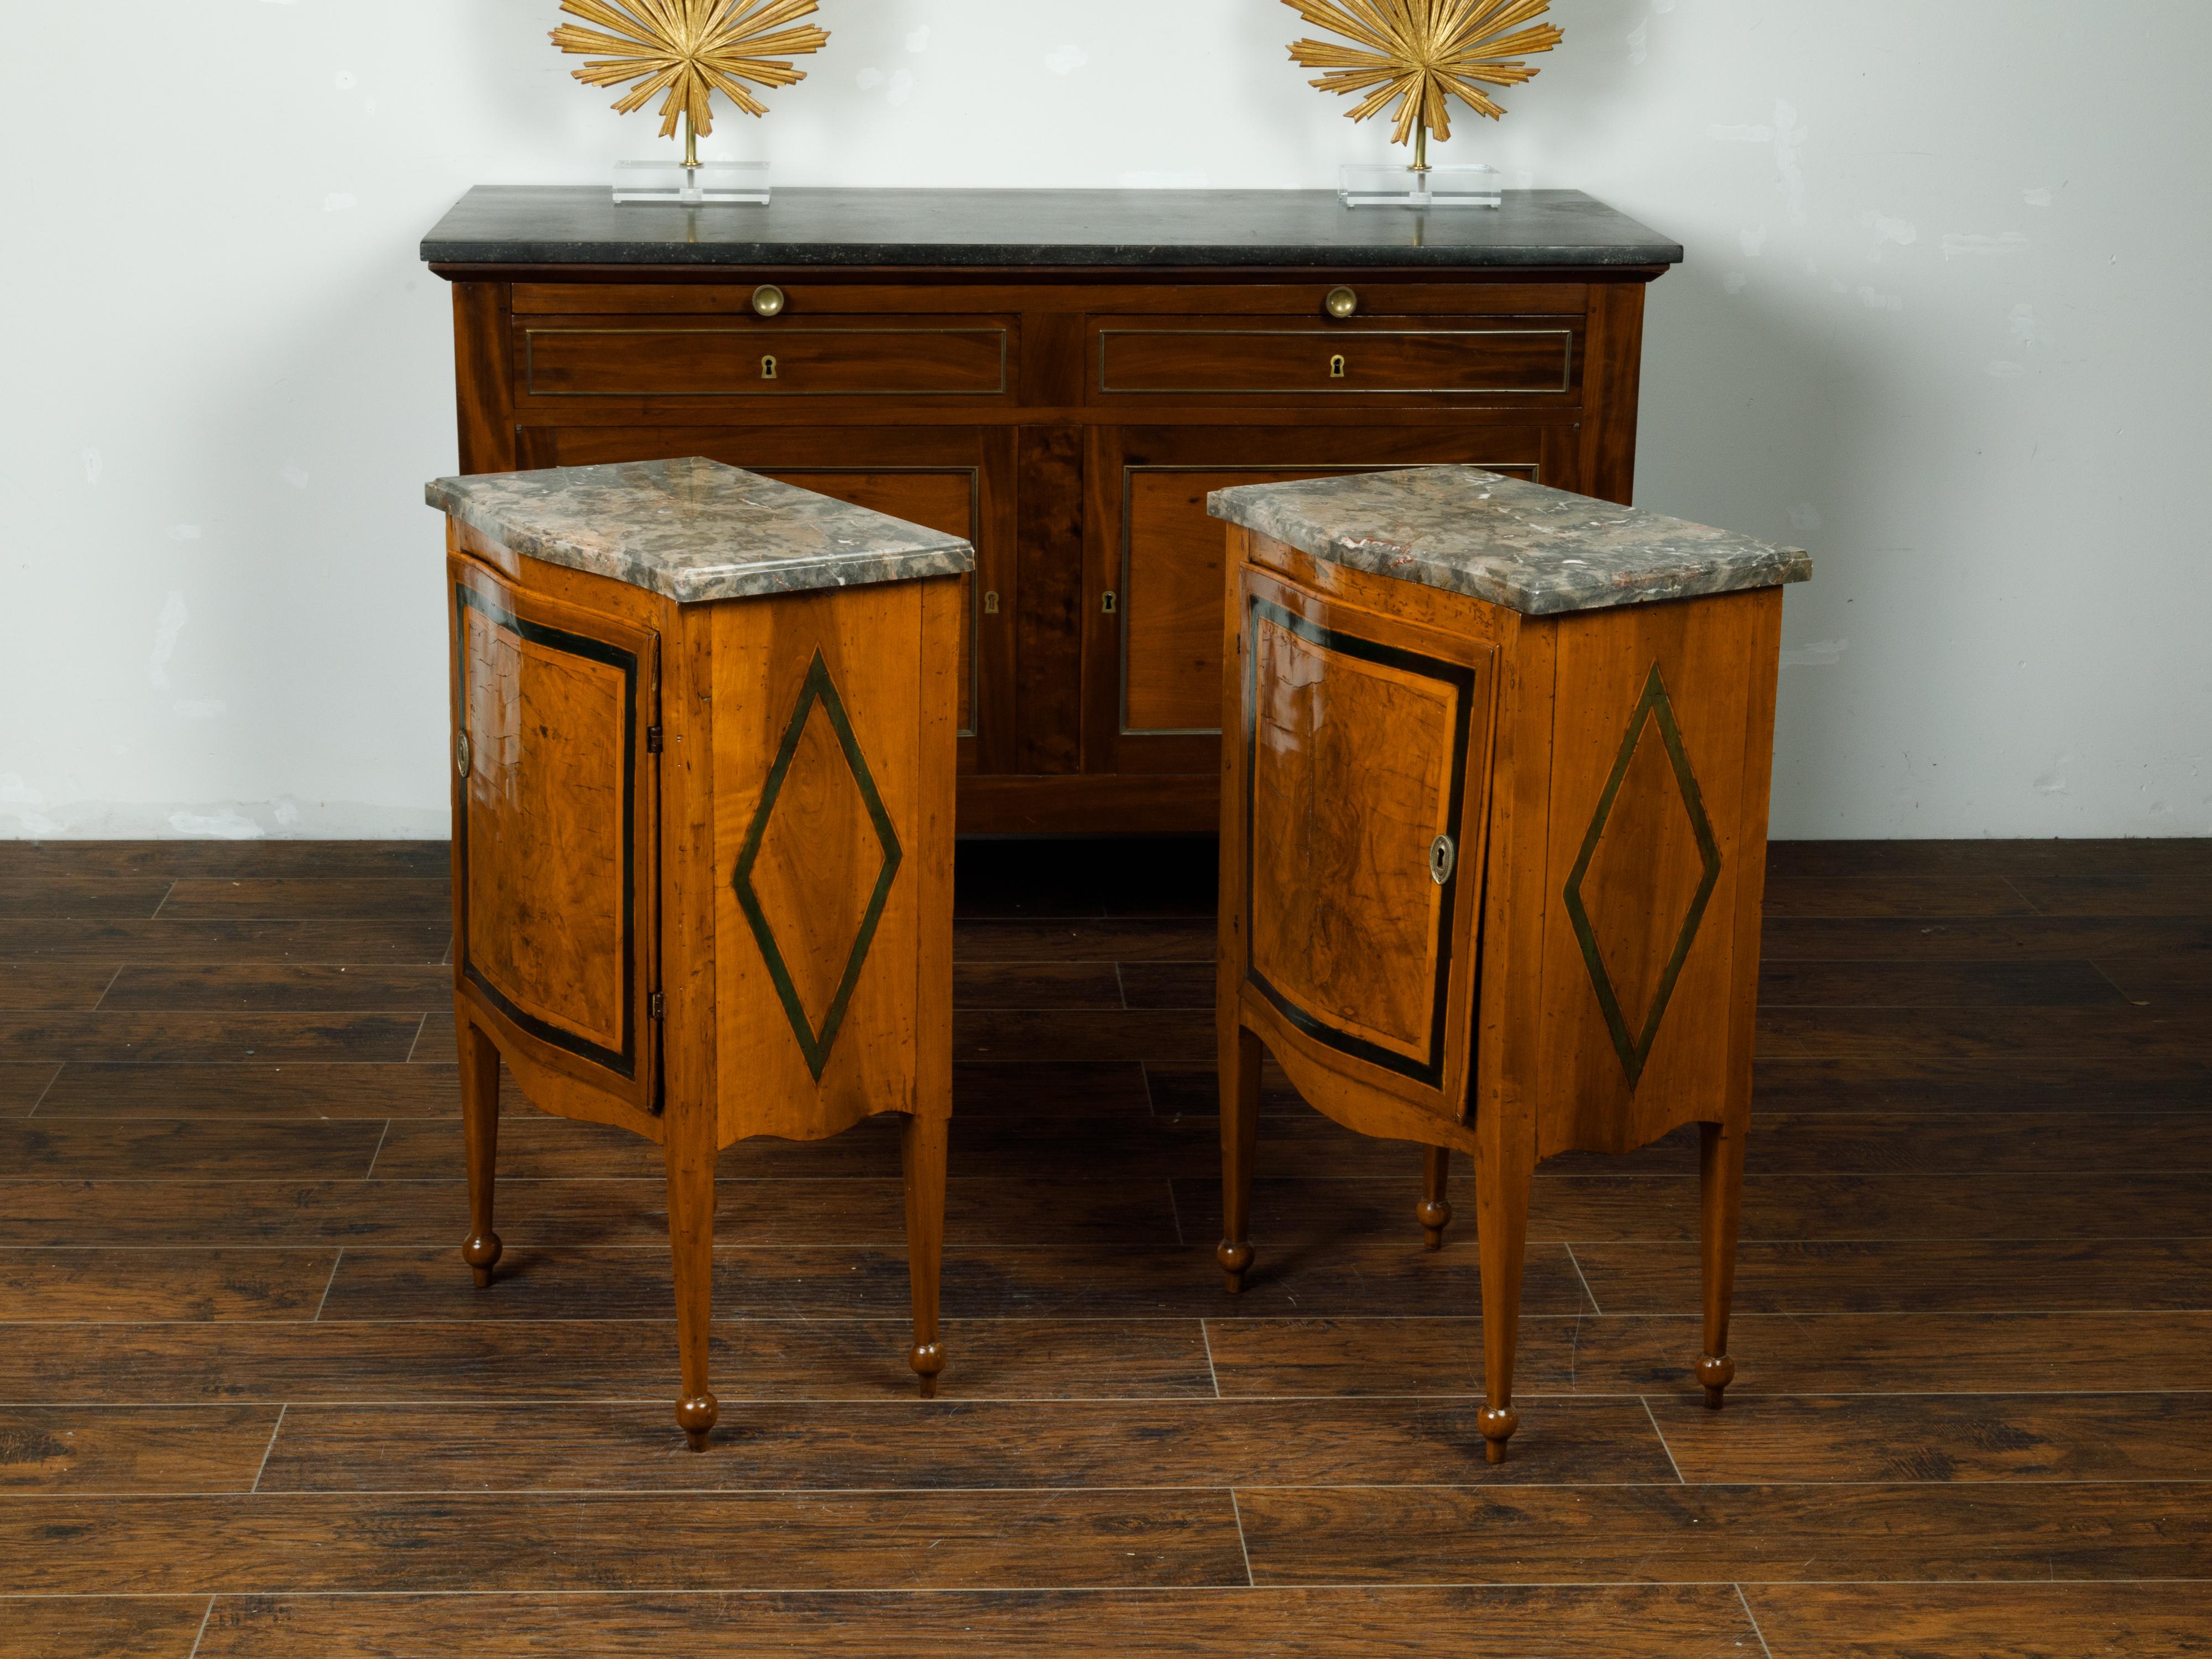 Pair of Italian 1840s Walnut Tables with Variegated Marble Top and Single Door For Sale 6